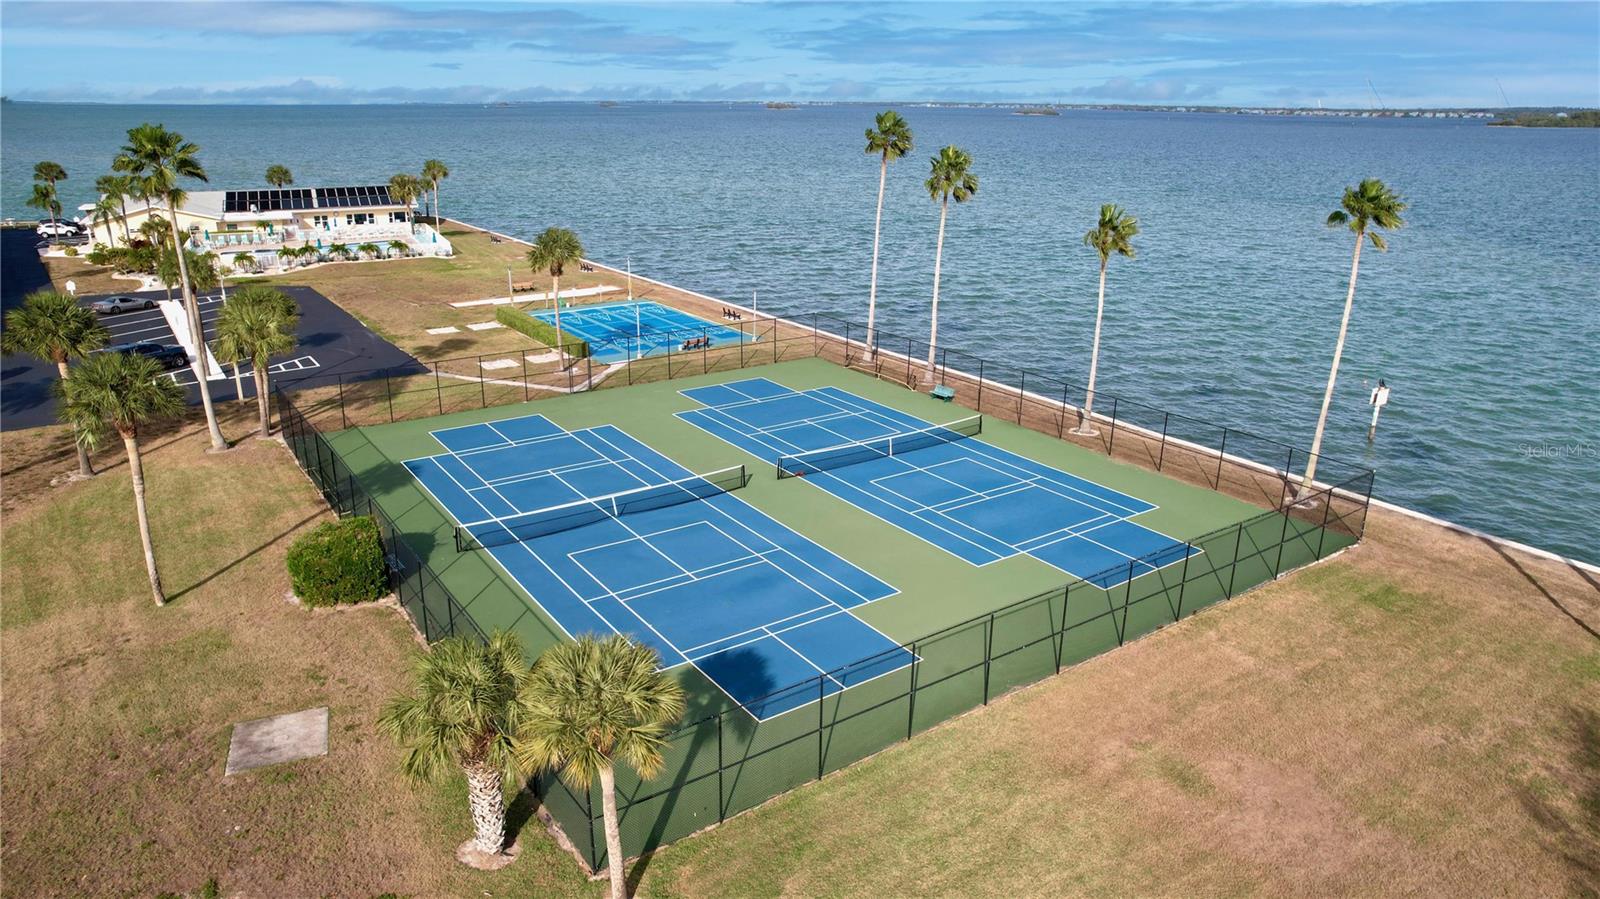 Pickle Ball with a veiw- Catch the Dolphins jumping -feeding.